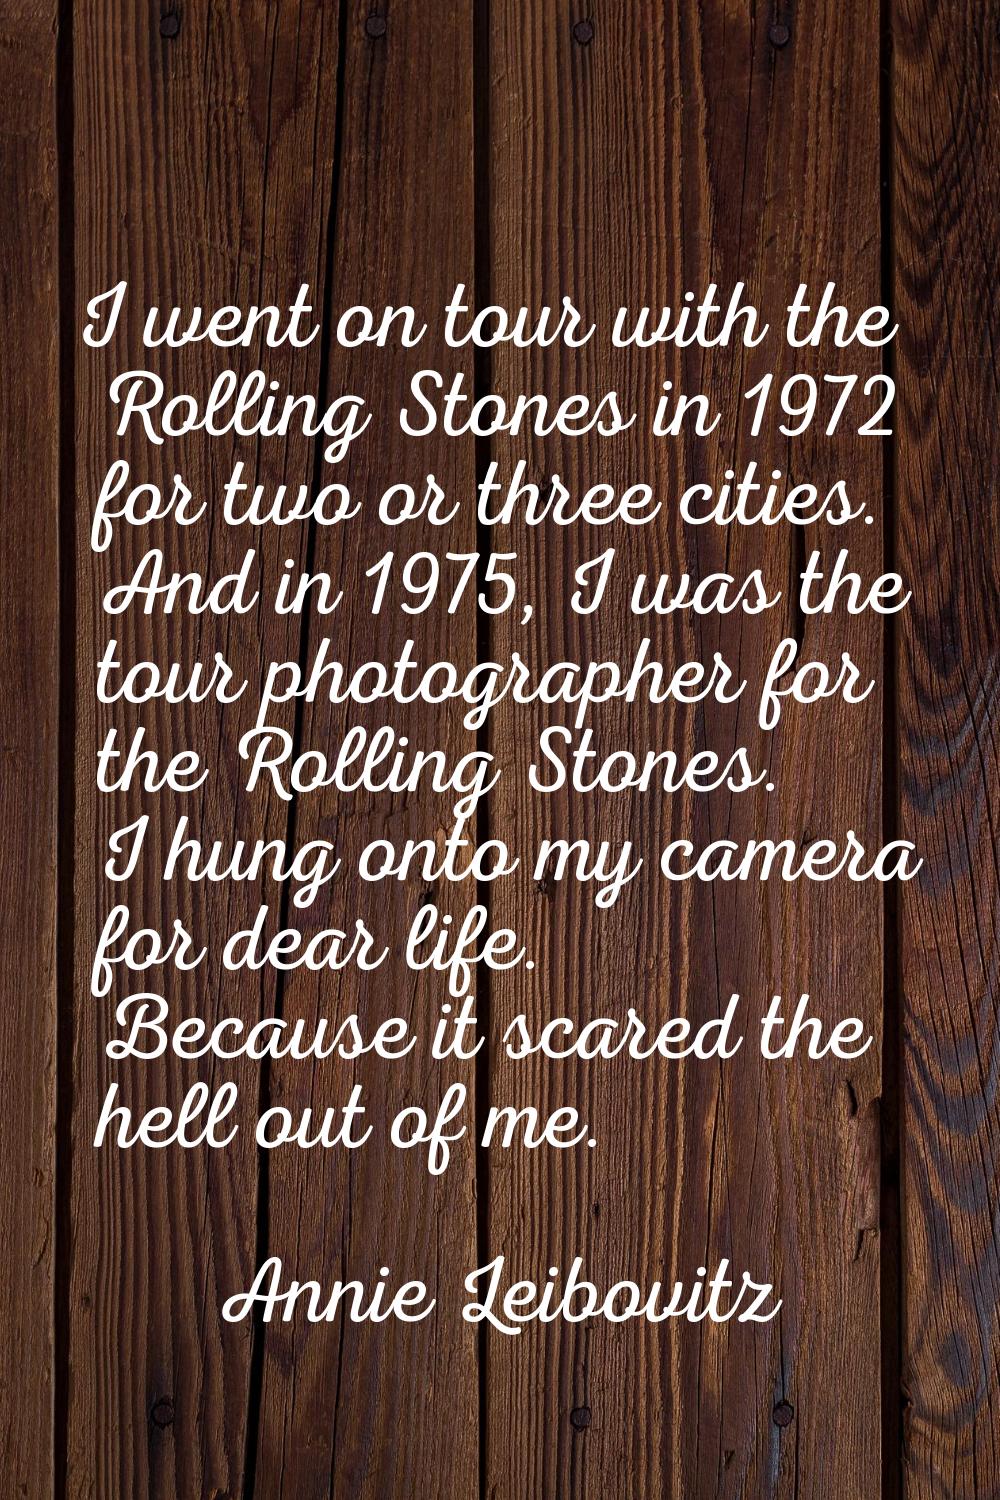 I went on tour with the Rolling Stones in 1972 for two or three cities. And in 1975, I was the tour